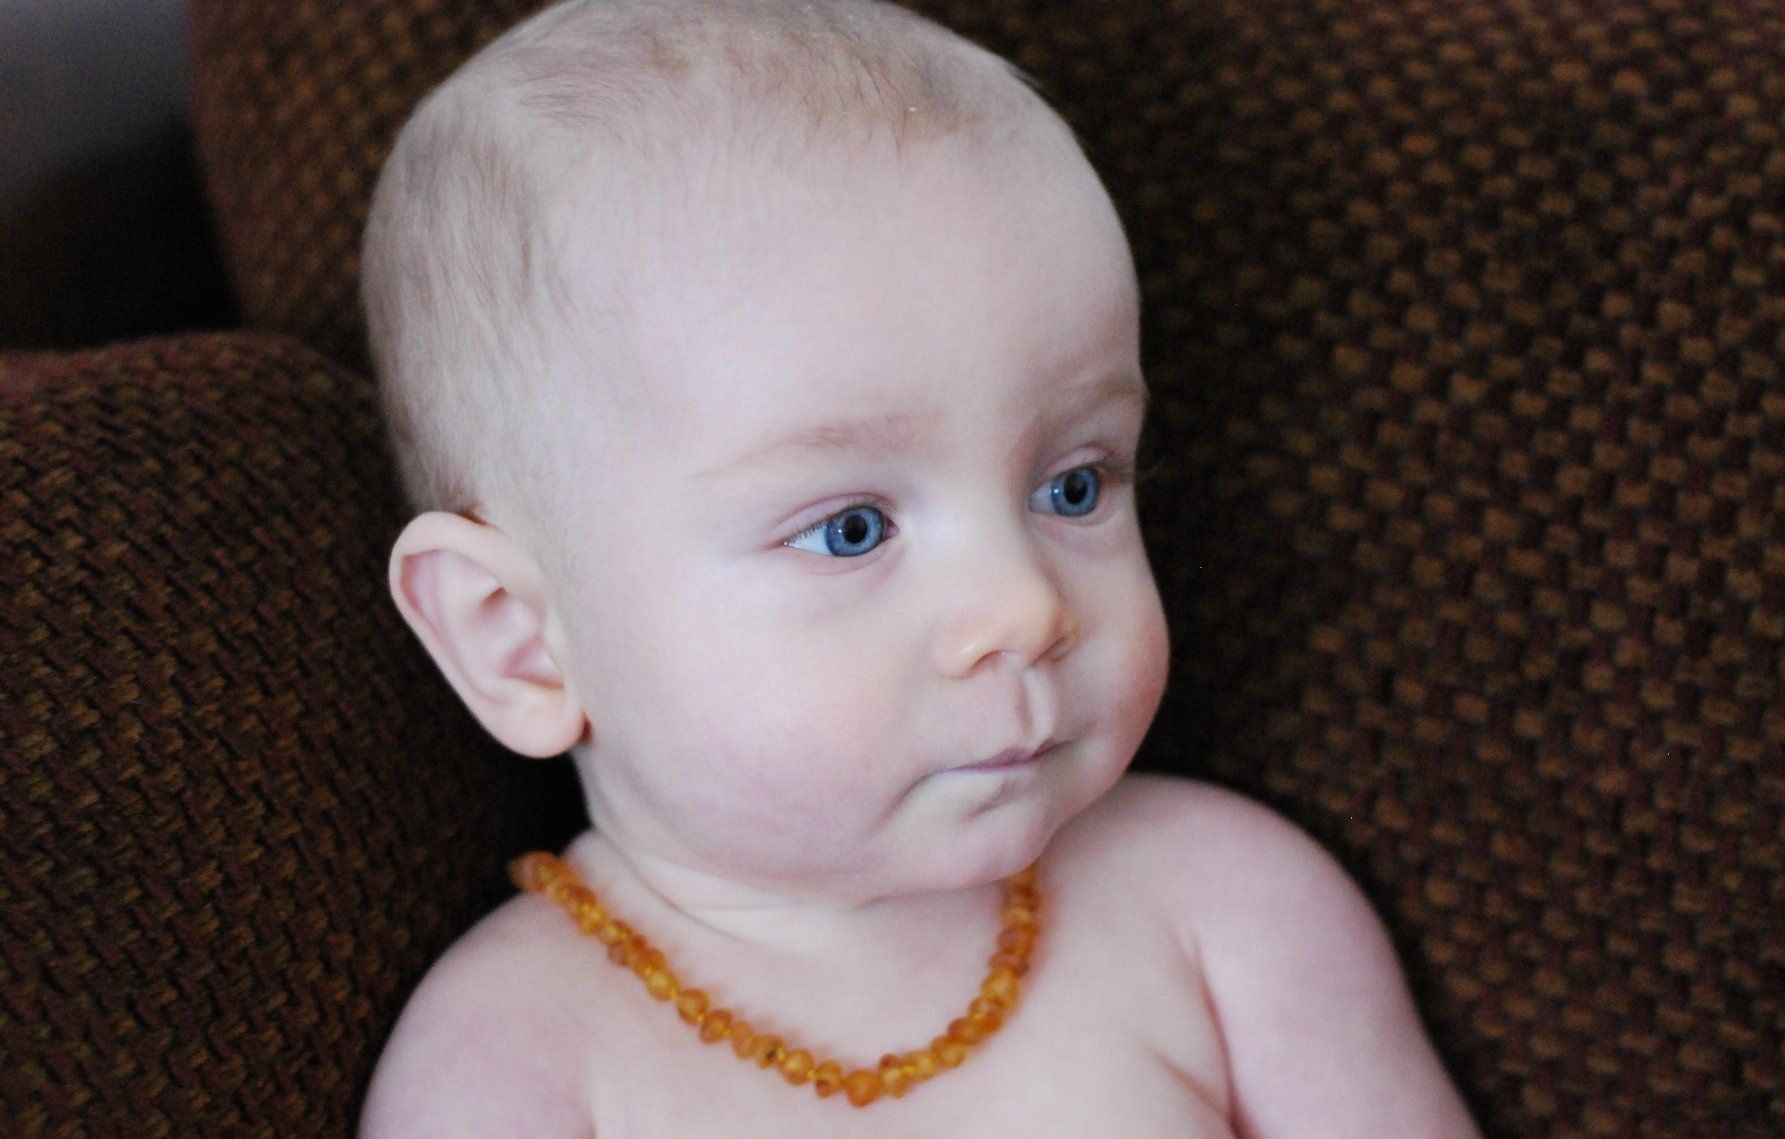 Raw Honey Bean 11 inch POP Baltic Amber Teething Necklace Baby